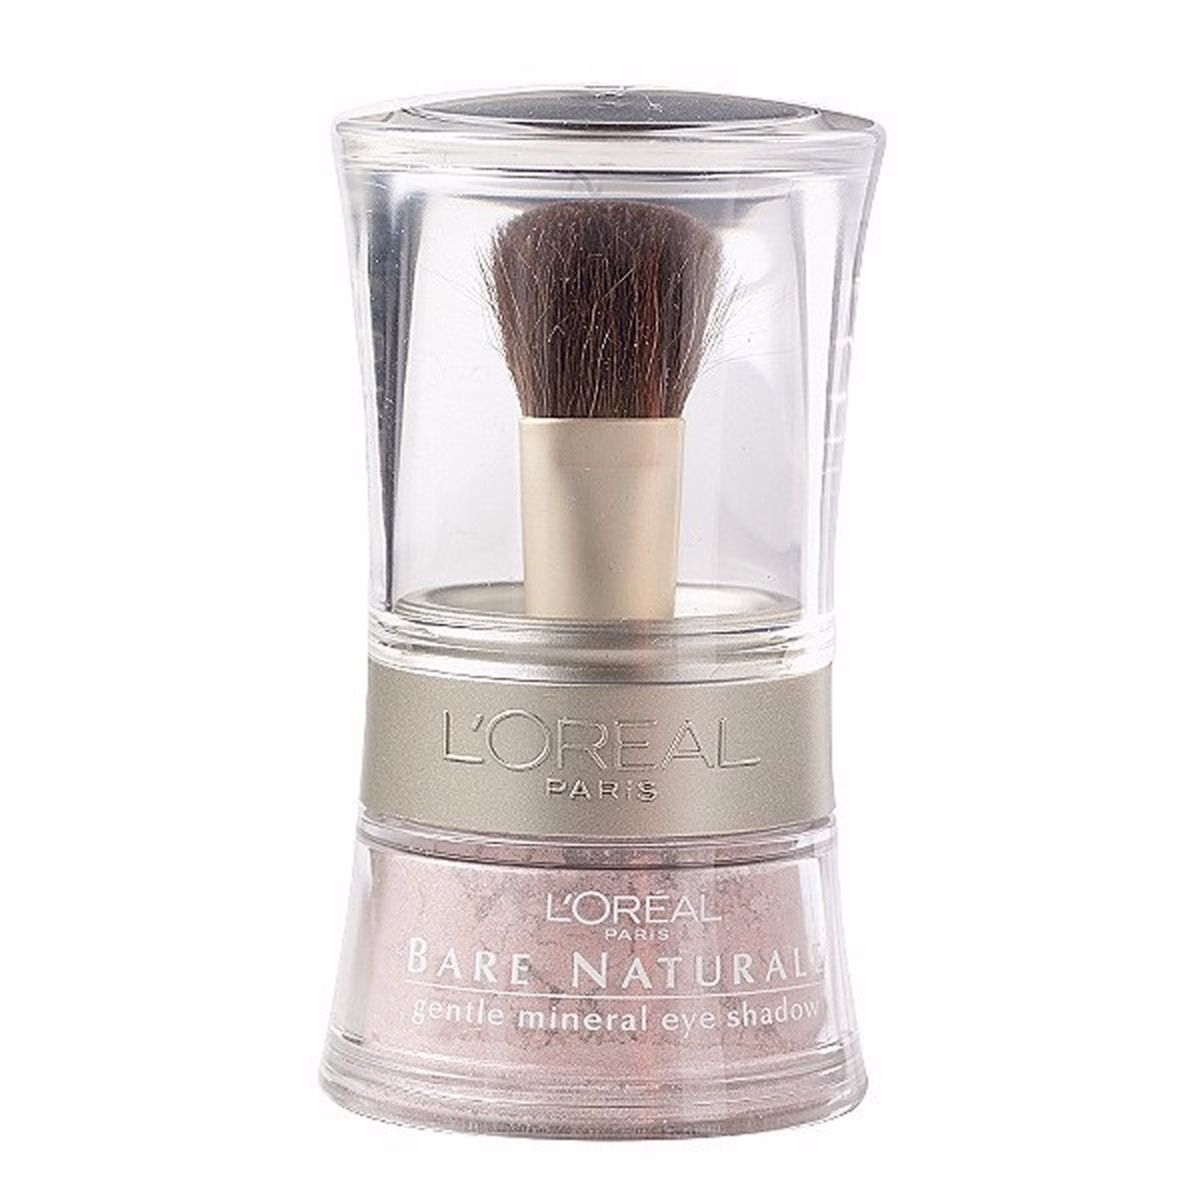 L'Oreal Color MINERALS Eye Shadow Loose Powder - 02 Pearly Rose